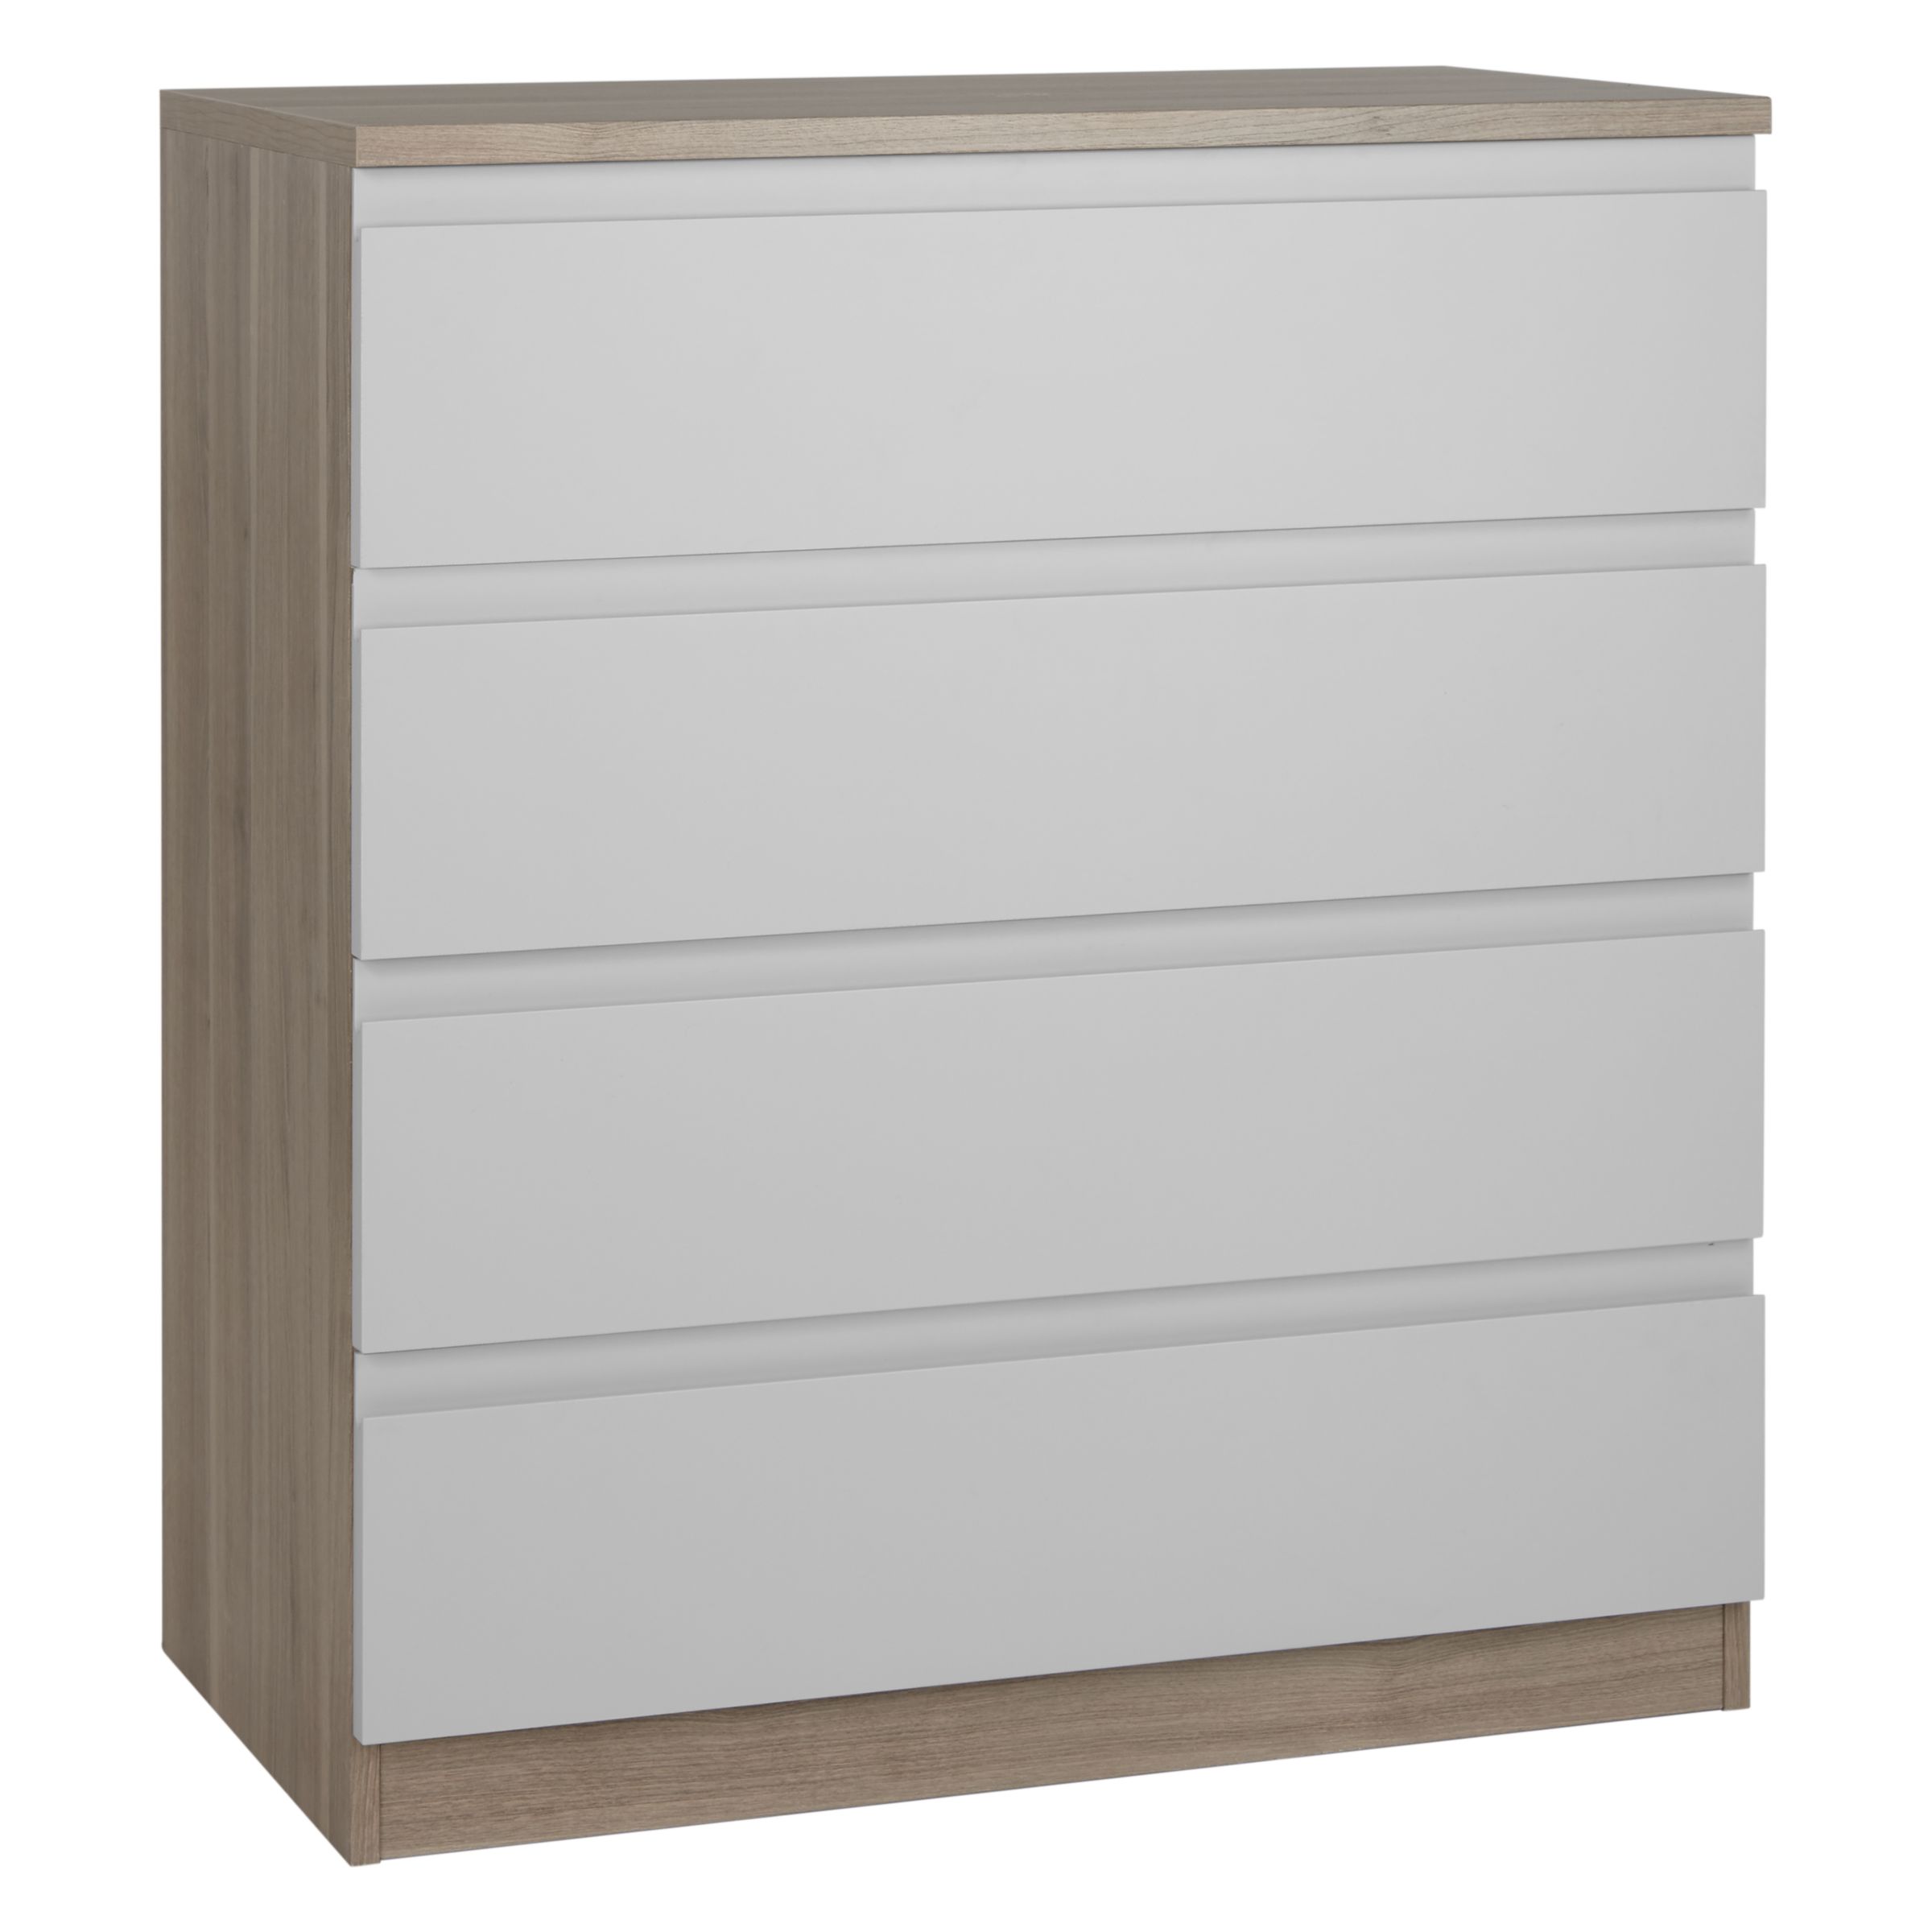 Photo of John lewis anyday mix it wide 4 drawer chest house smoke/grey ash